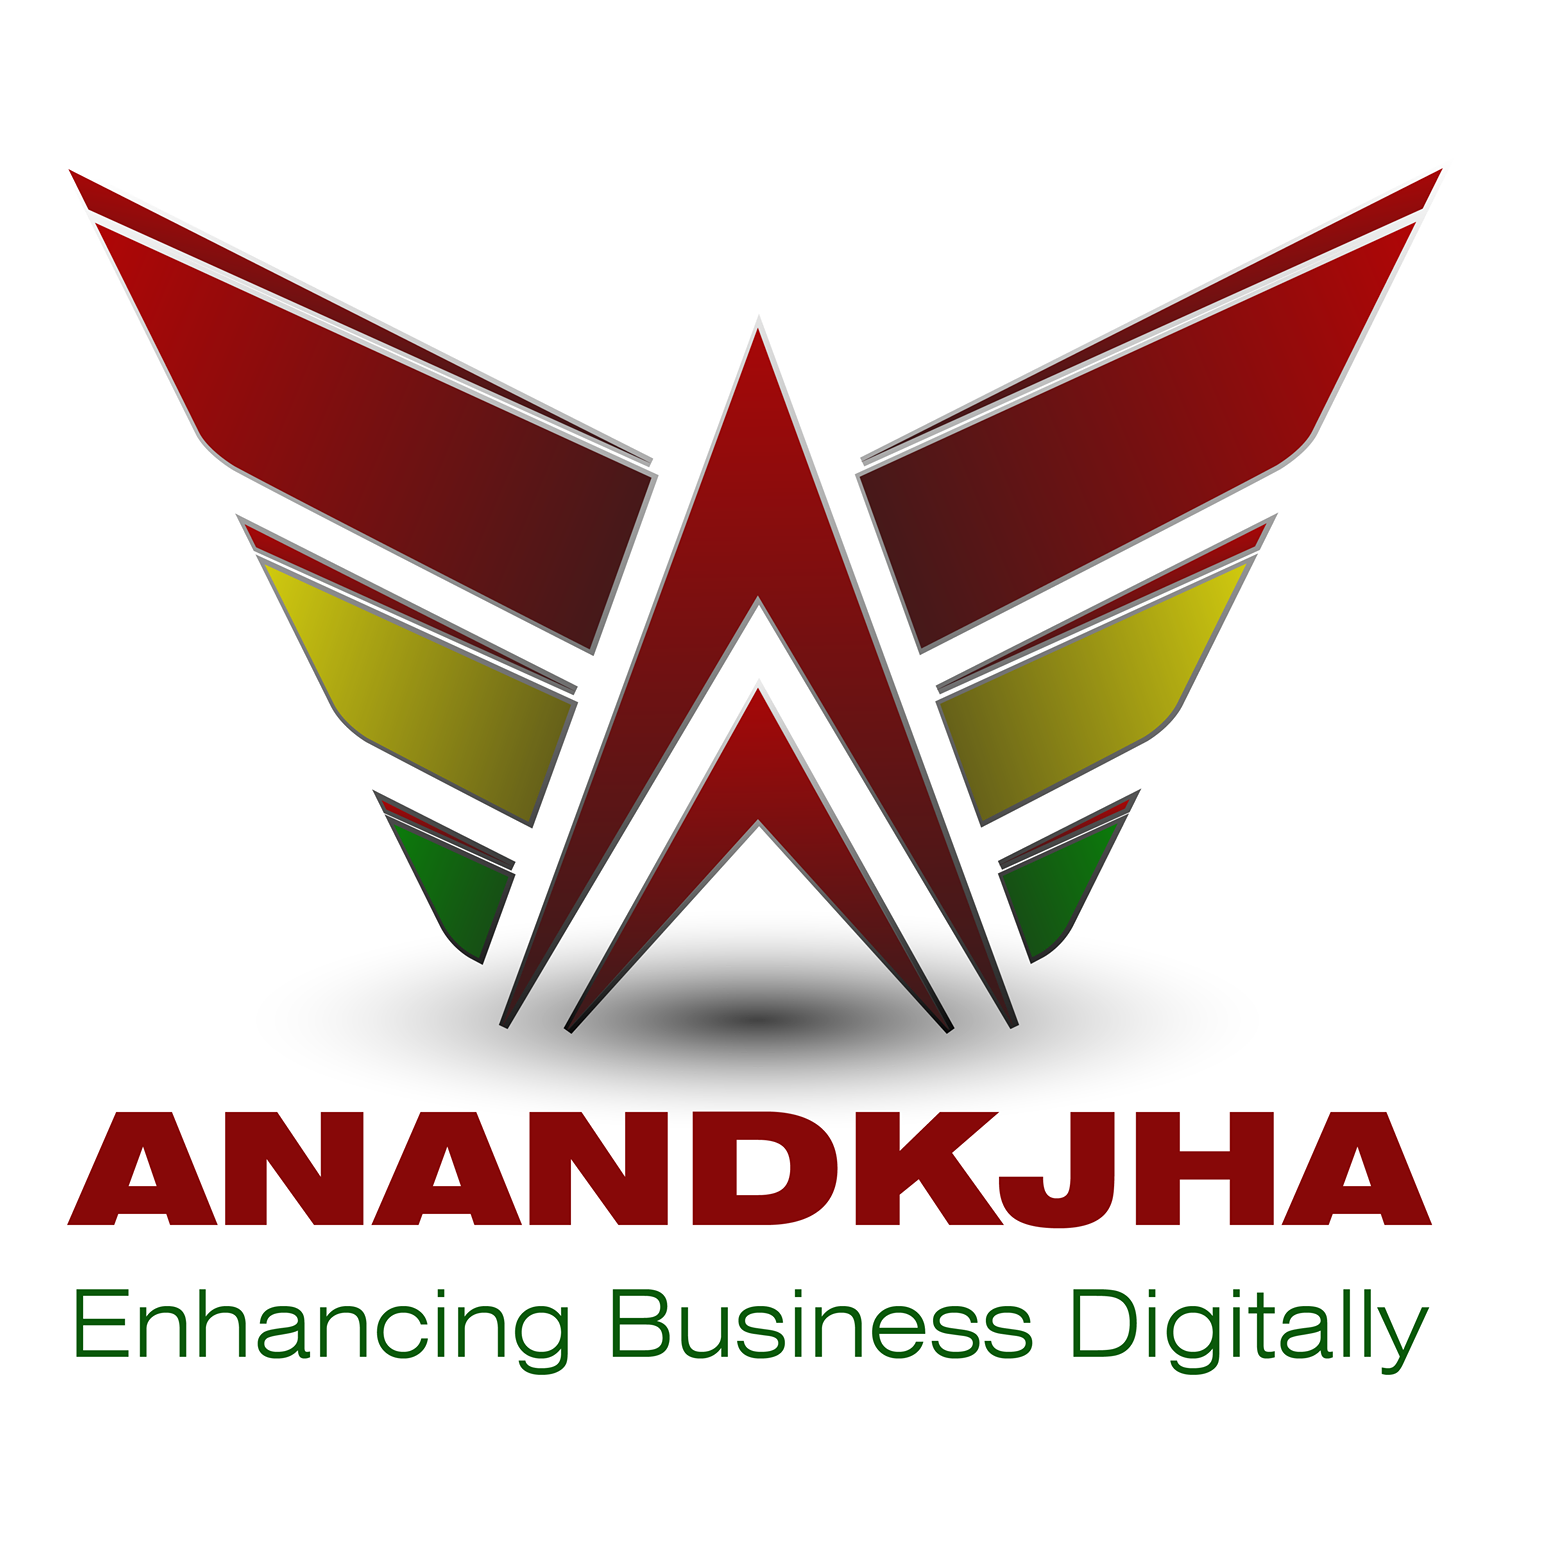 AnandKJha Digital Marketing Services profile on Qualified.One